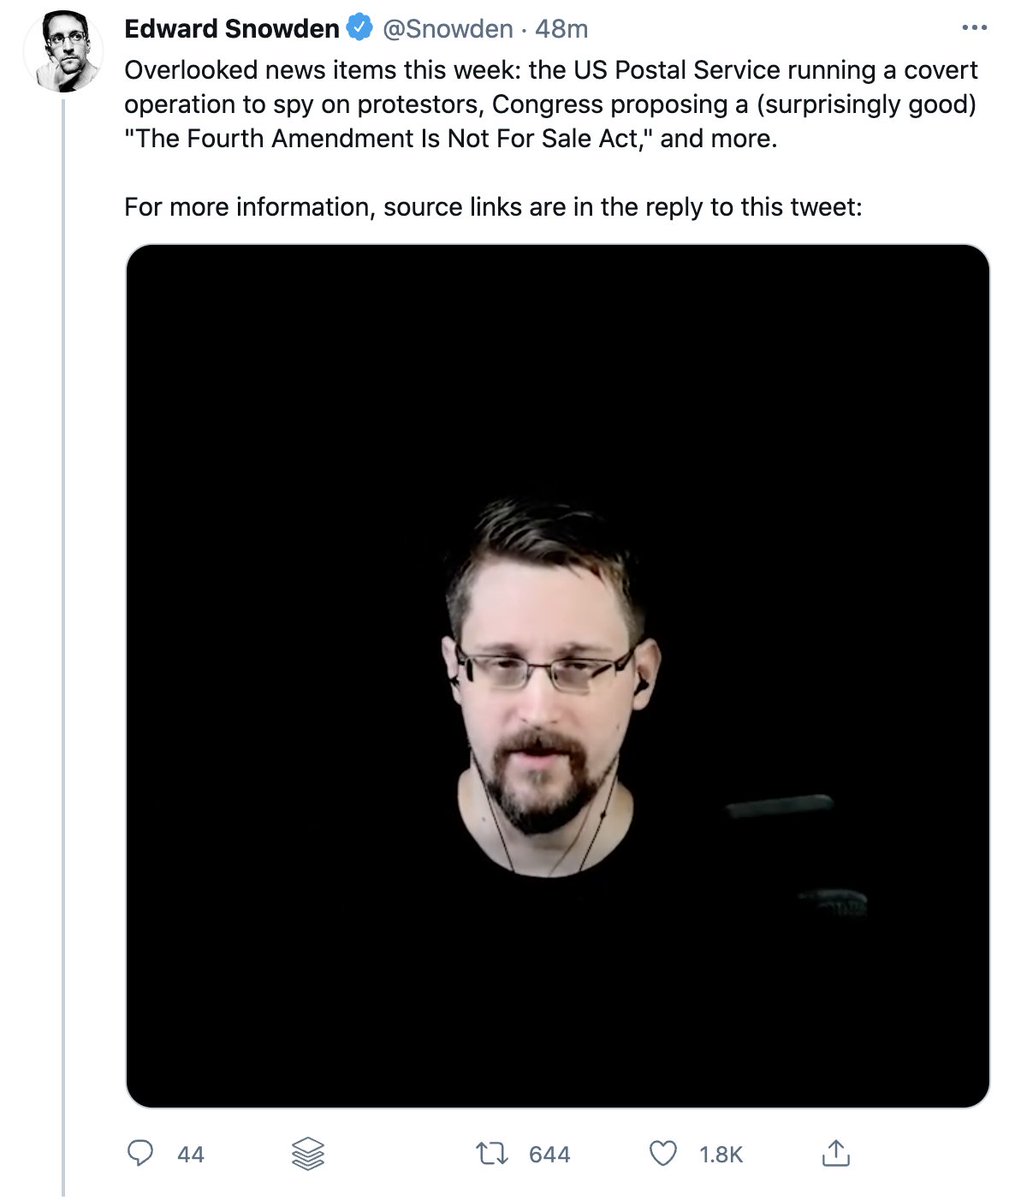 To prove that Snowden is (eventually) going to appear at this seminar, host plays first few seconds of a recent video tweeted by Snowden that mentions the event at the top.